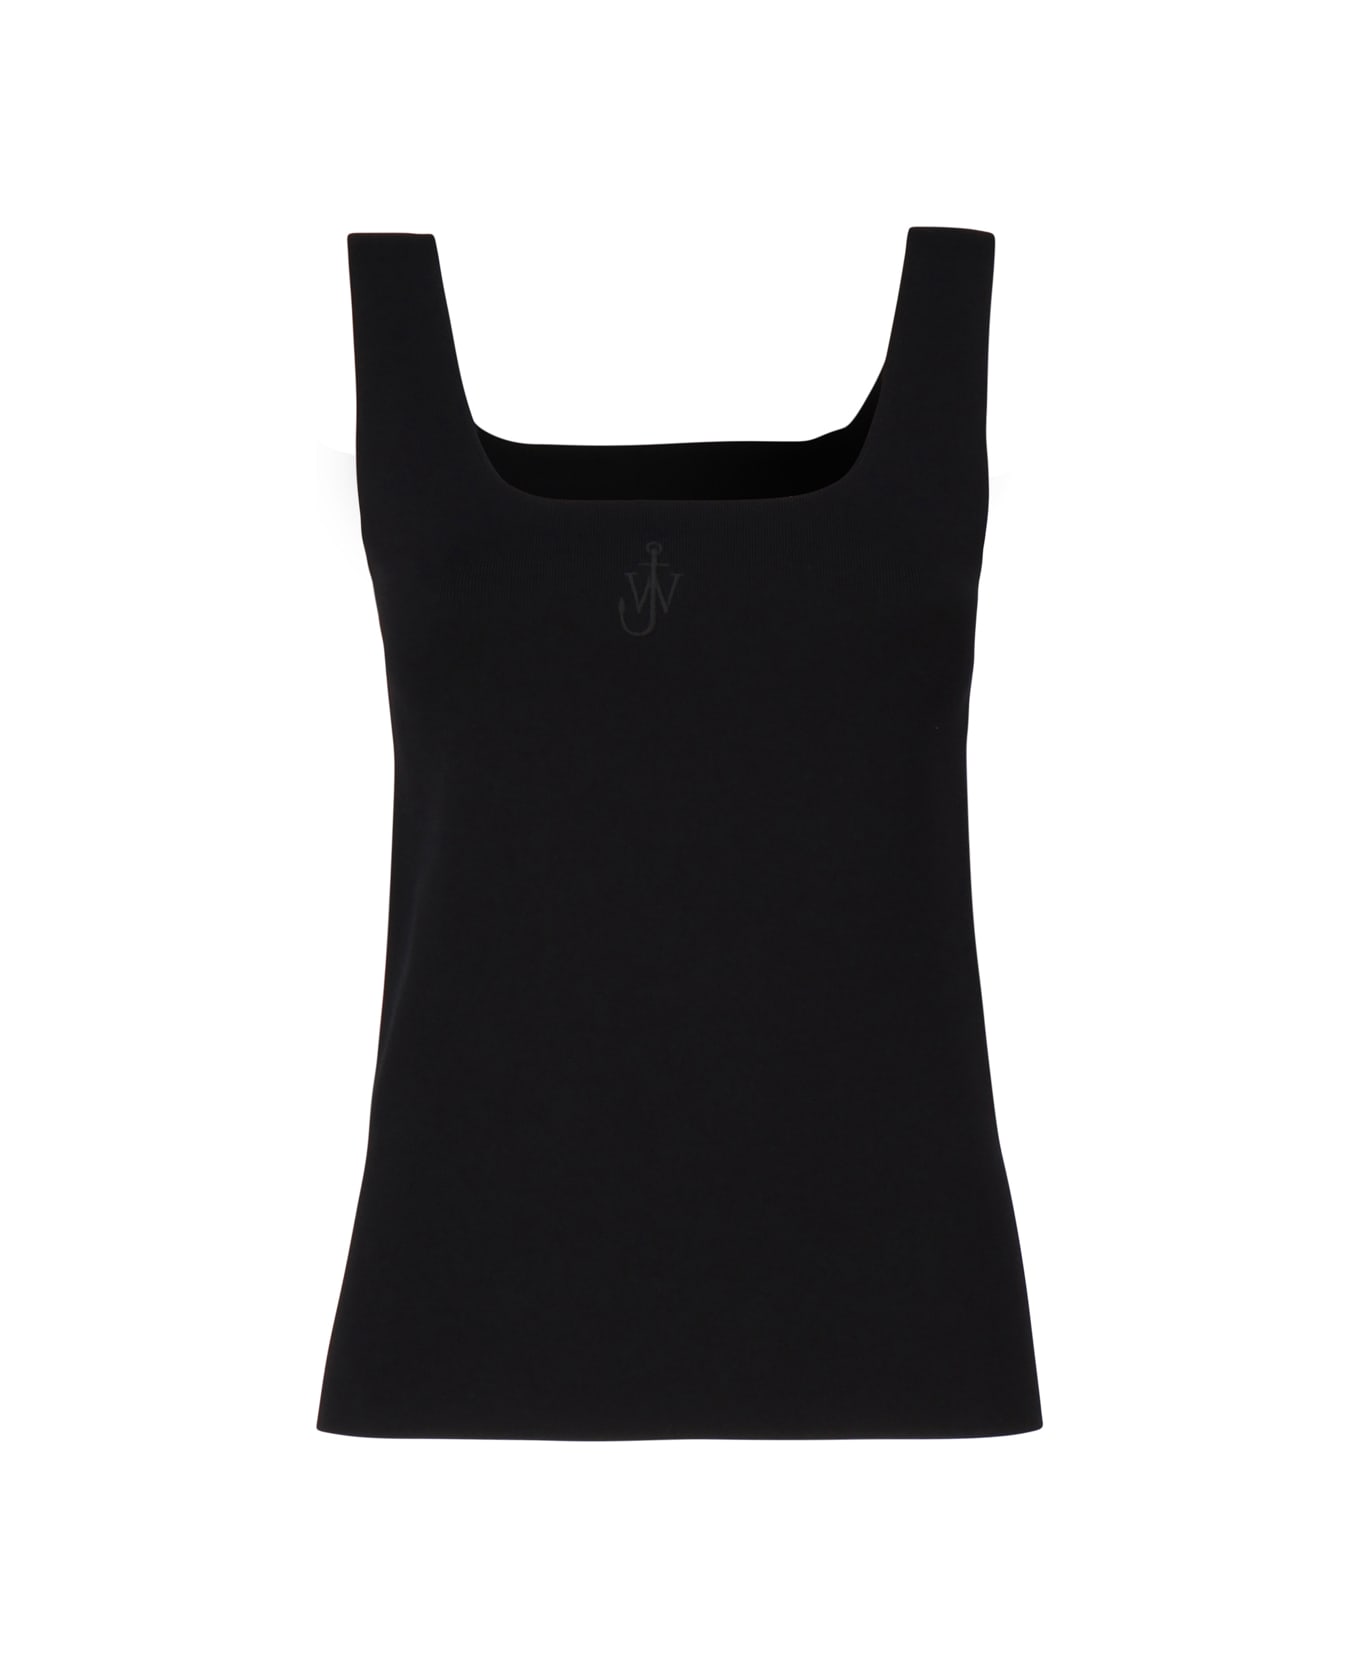 J.W. Anderson Tank Top With Anchor Embroidery - Black